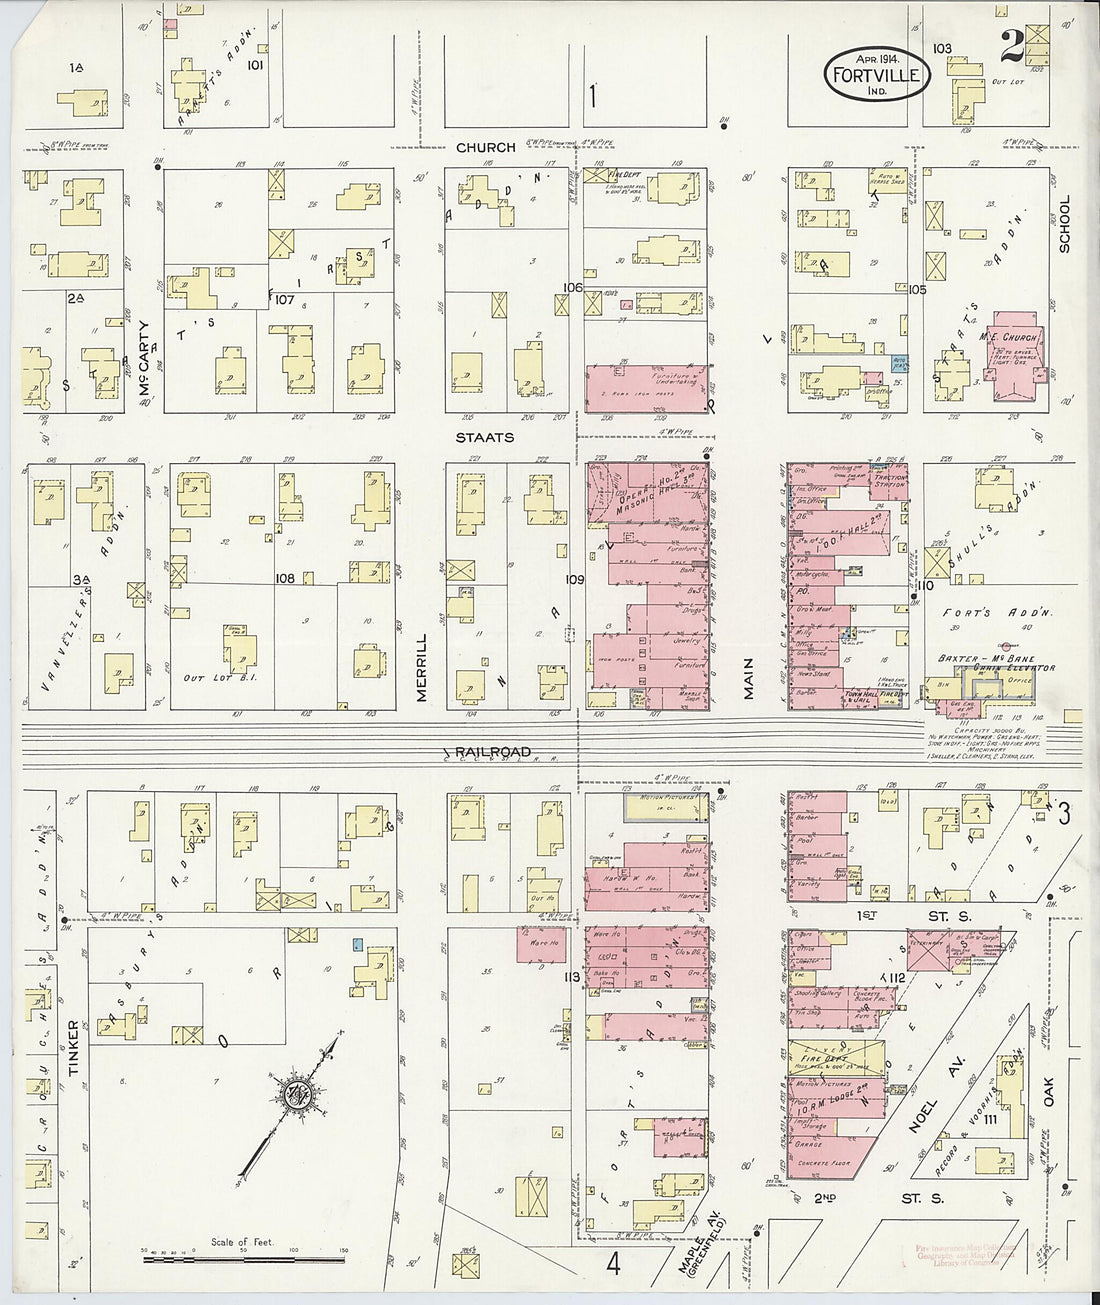 This old map of Fortville, Hancock County, Indiana was created by Sanborn Map Company in 1914